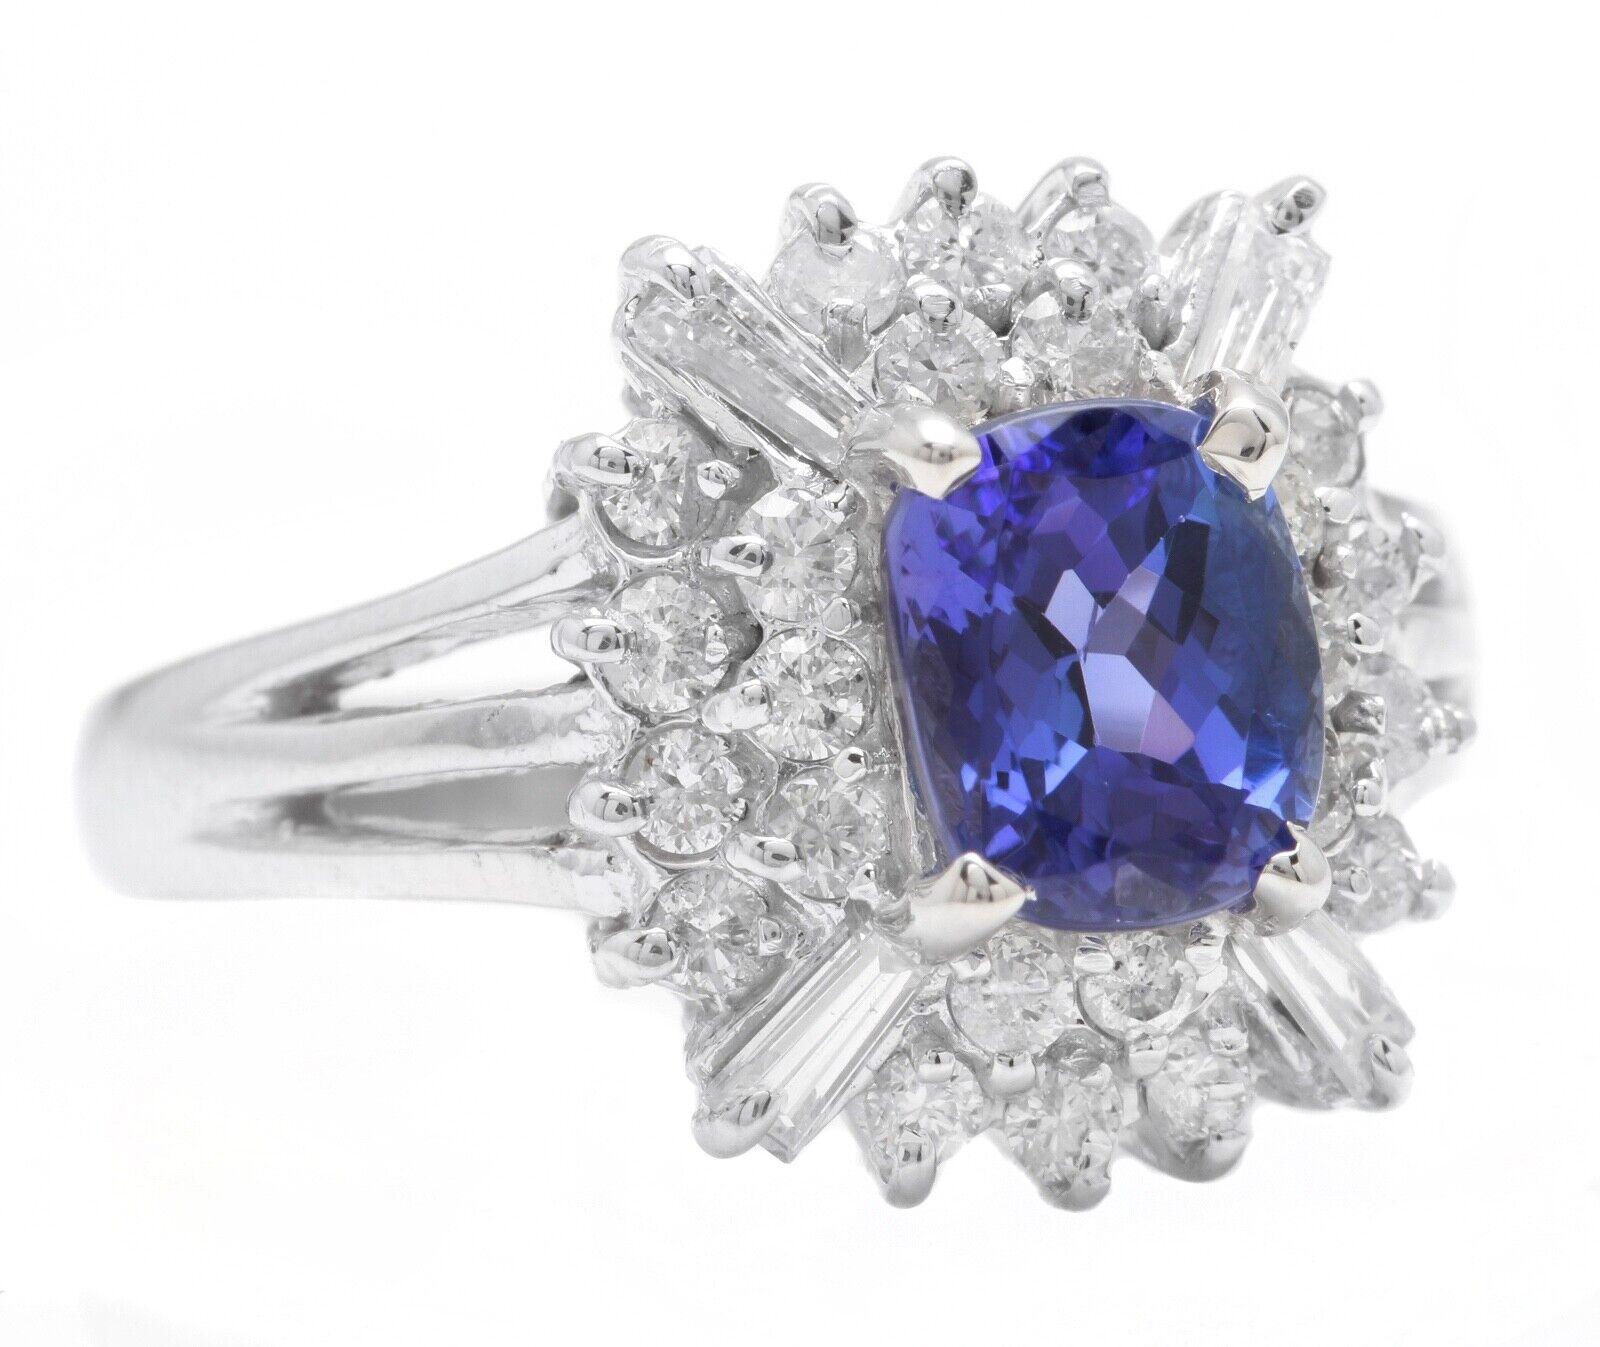 3.30 Carats Natural Very Nice Looking Tanzanite and Diamond 18K Solid White Gold Ring

Suggested Replacement Value:  Approx. $7,000.00

Total Natural Cushion Cut Tanzanite Weight is: Approx. 2.00 Carats

Tanzanite Measures: Approx. 8.00  x